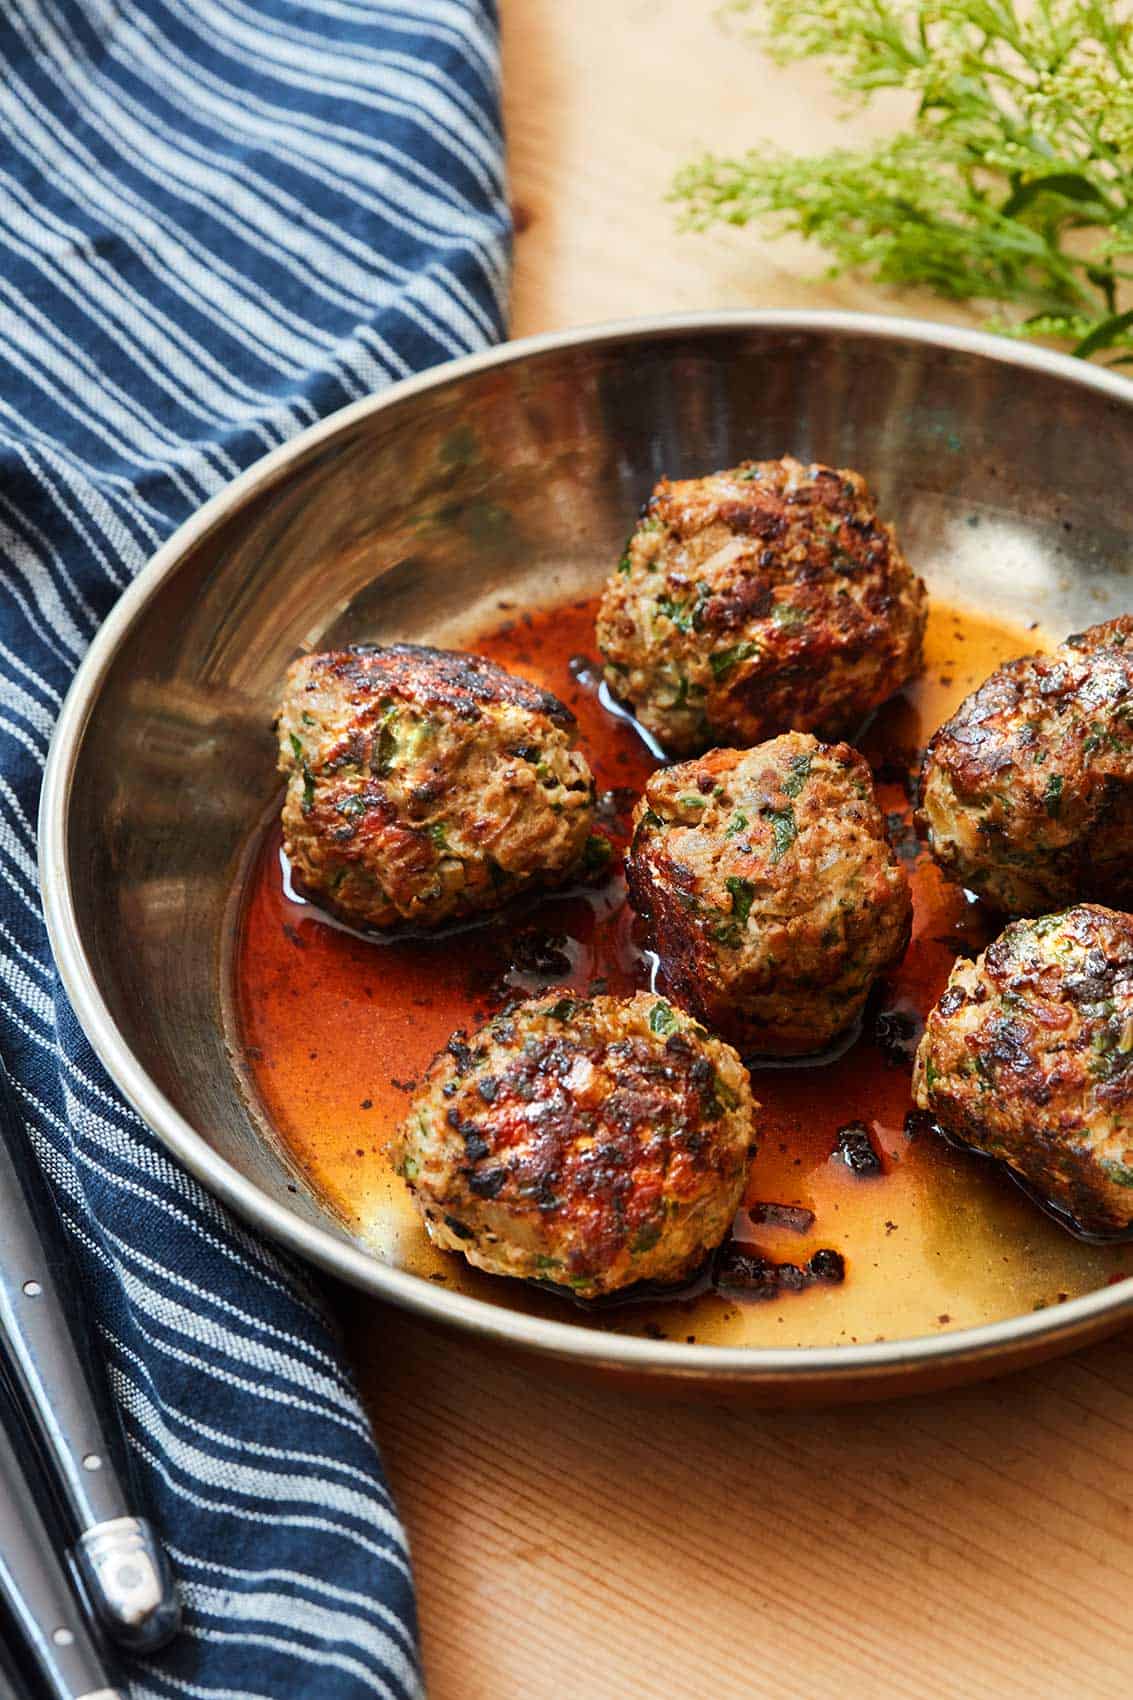 Turkey Meatballs served in silver pan on wooden surface